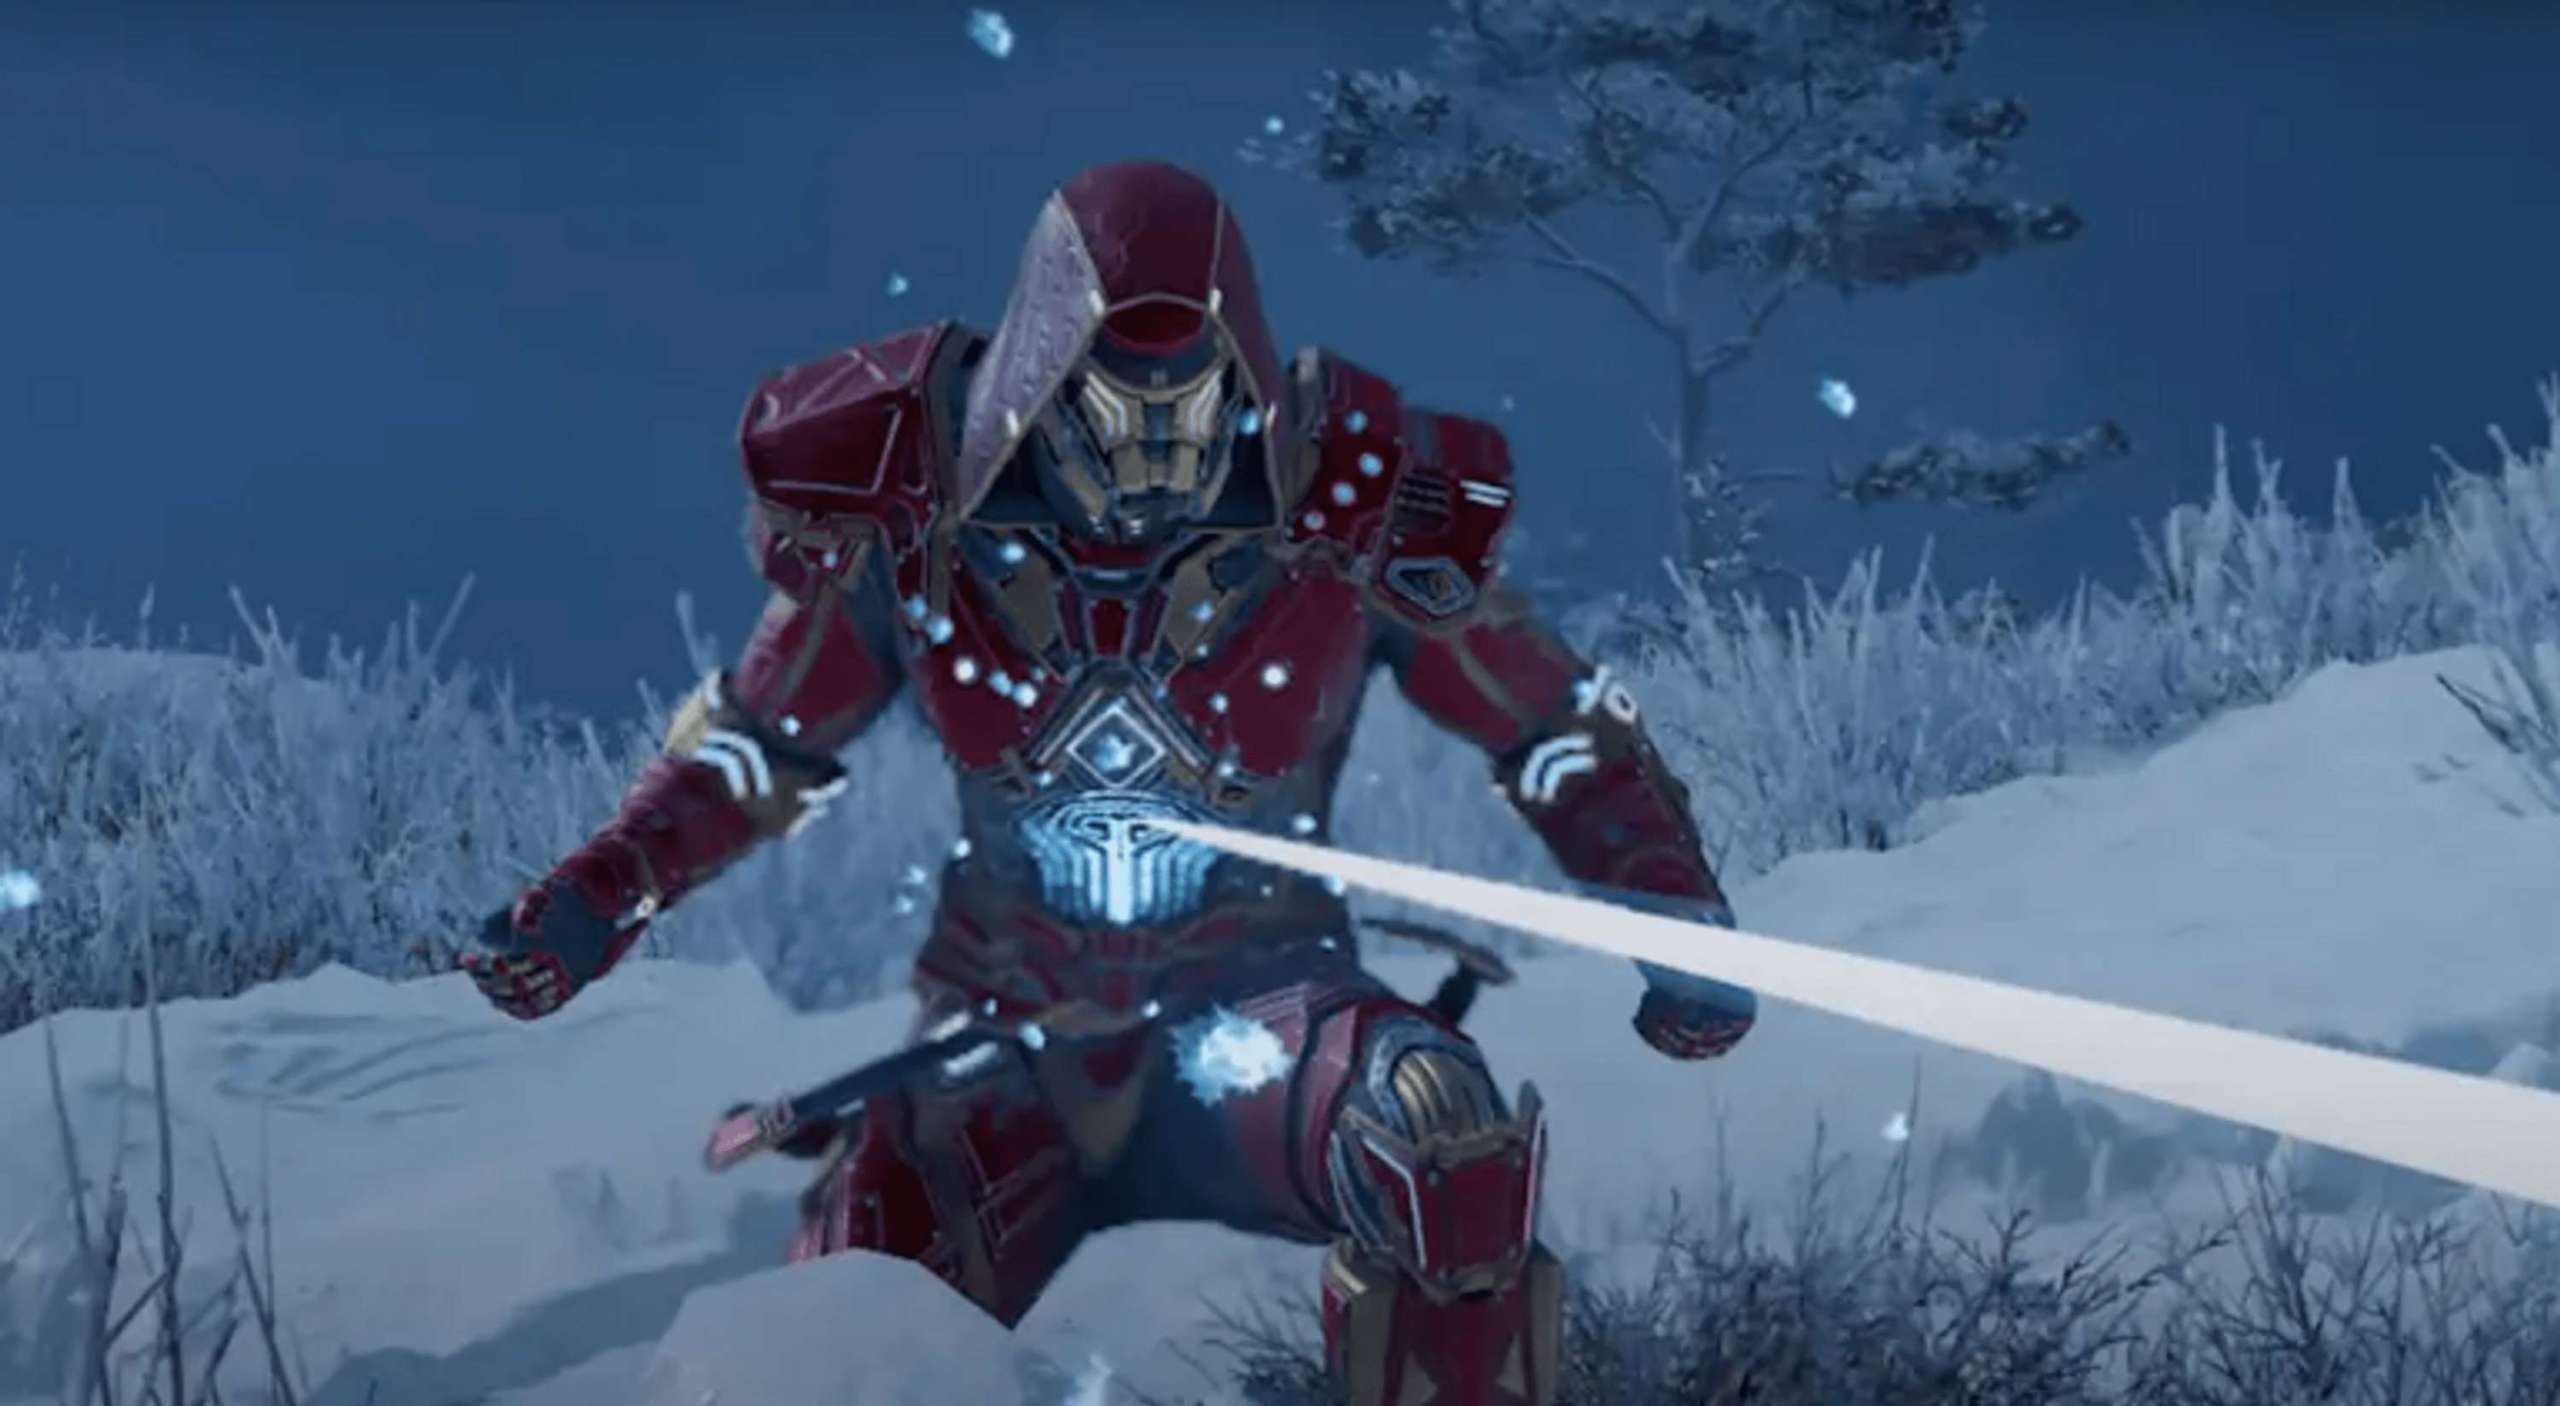 Data Miners For Assassin’s Creed: Valhalla Found Files For An Iron Man Skin With A Chest-Mounted Unibeam